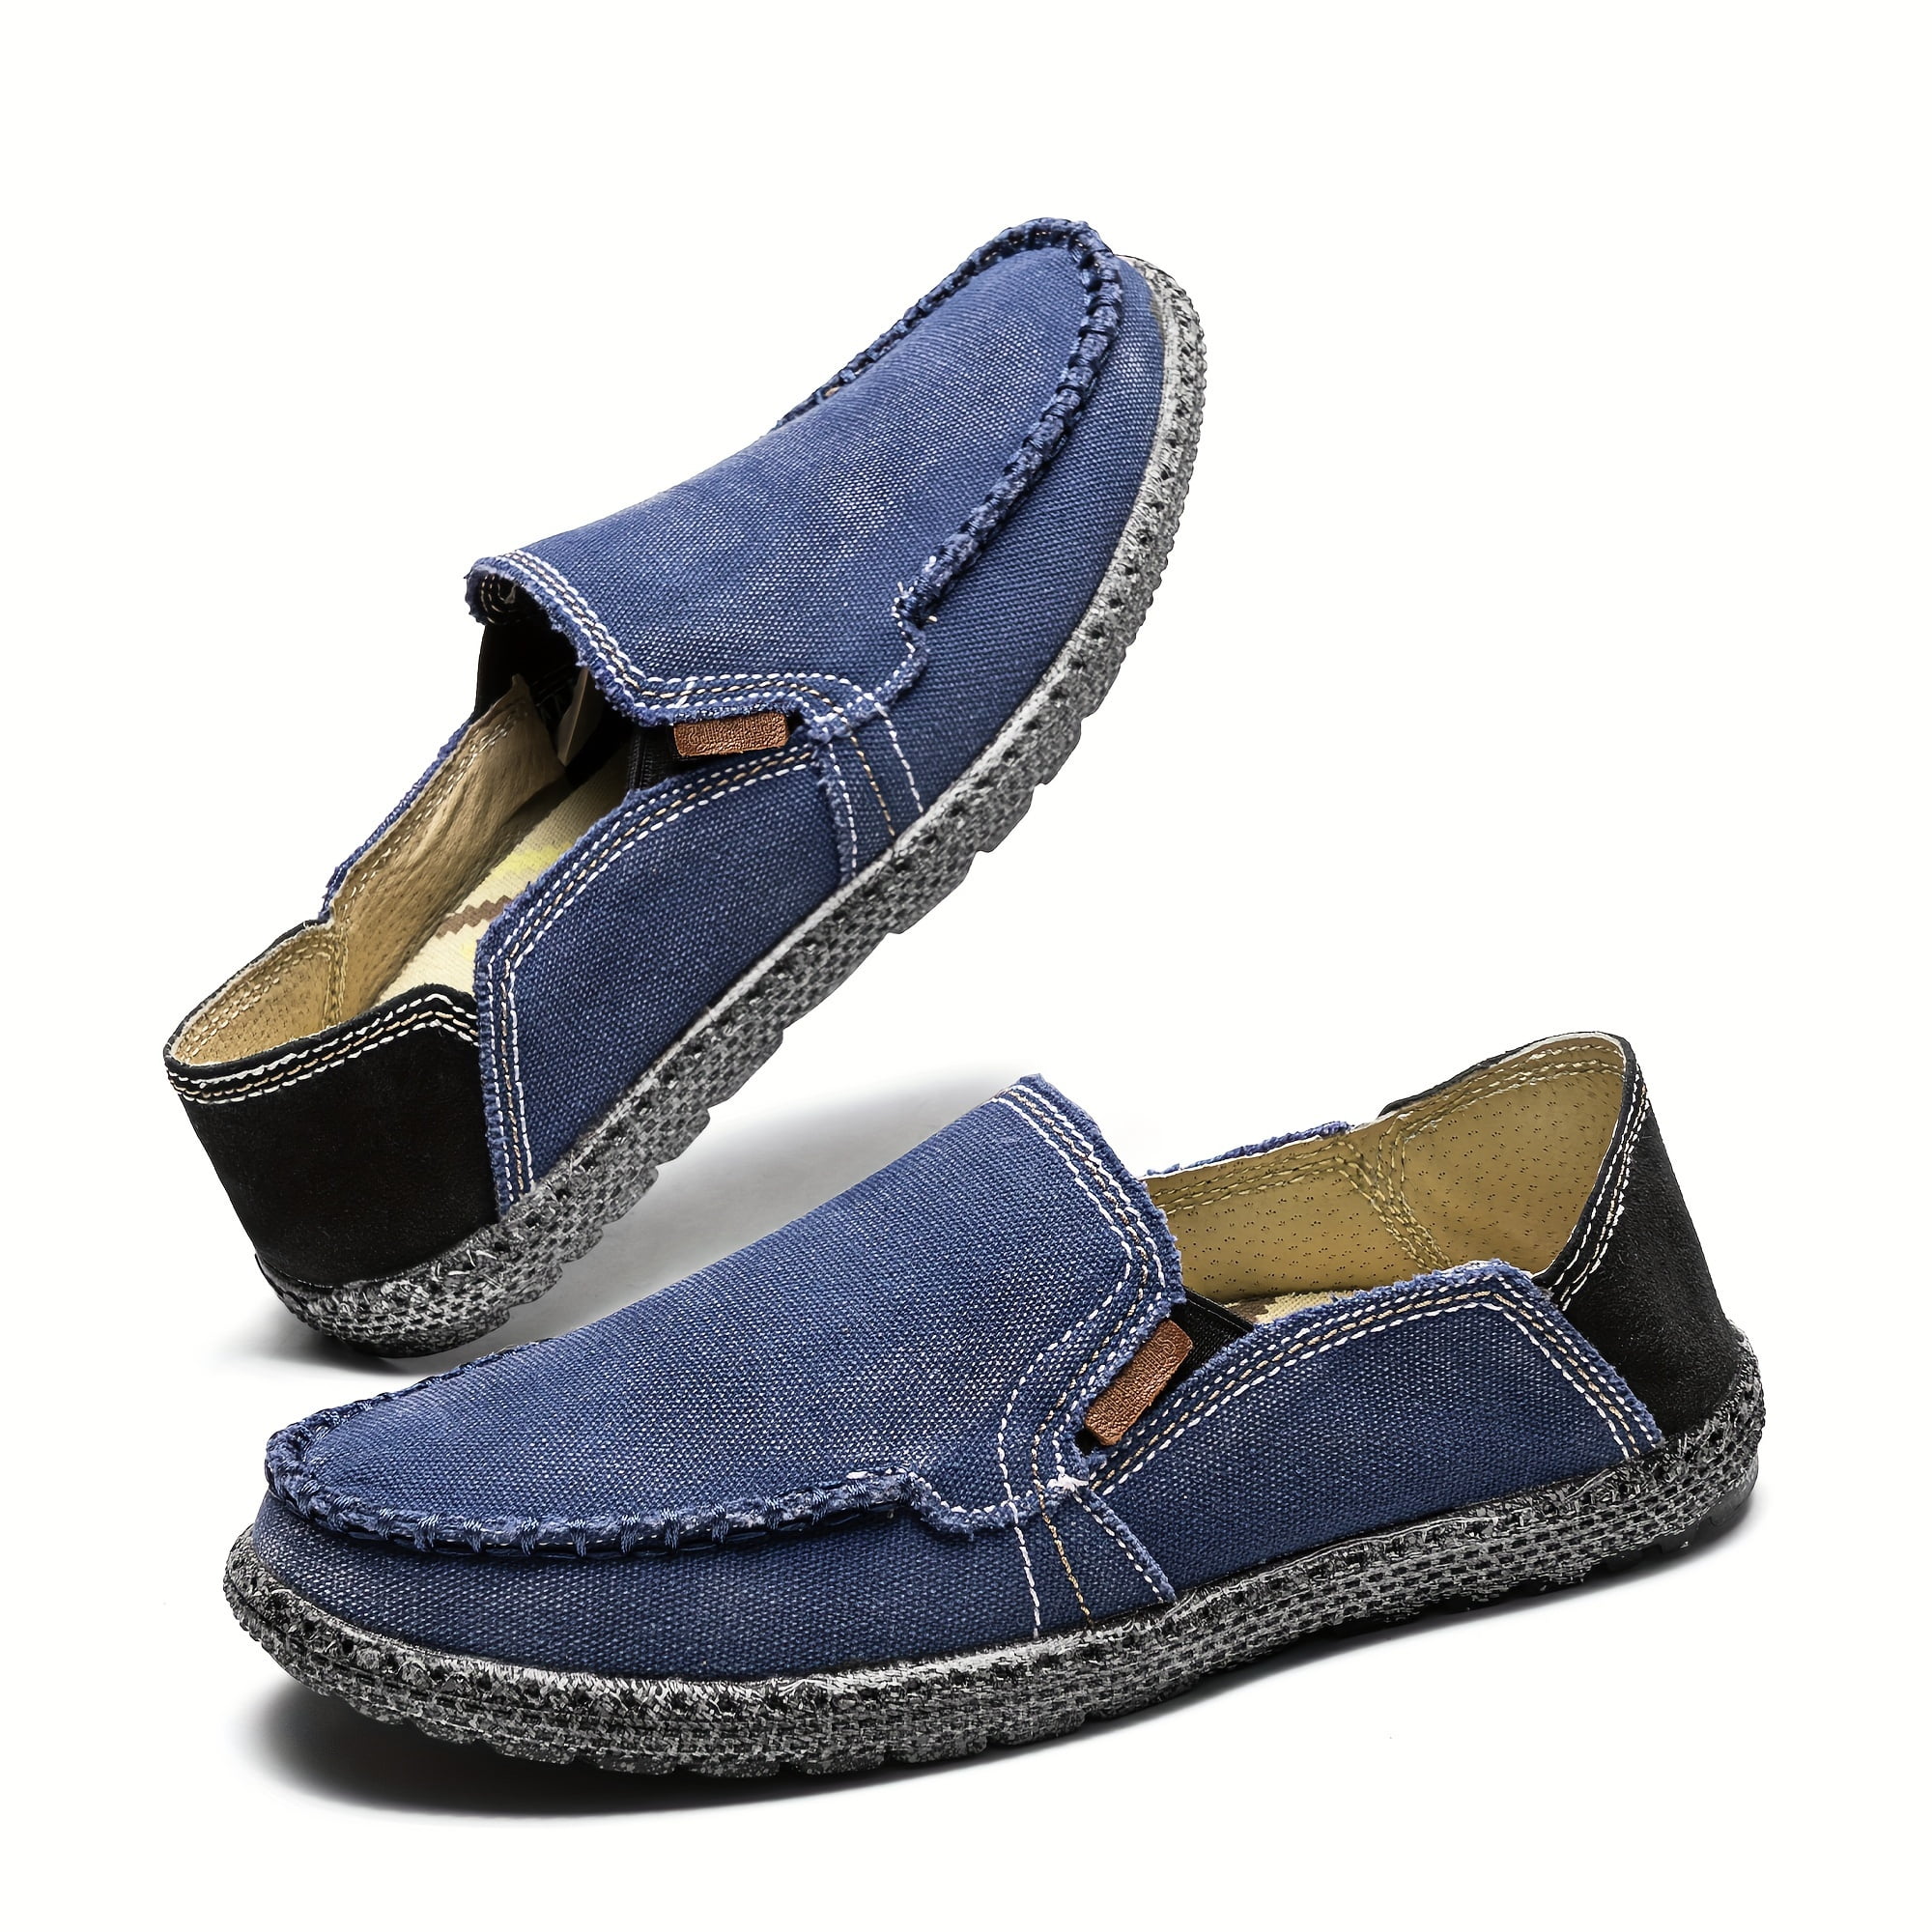 Men's Cloth Shoes Street Walking Loafers Boat Shoes Deck Shoes Canvas ...